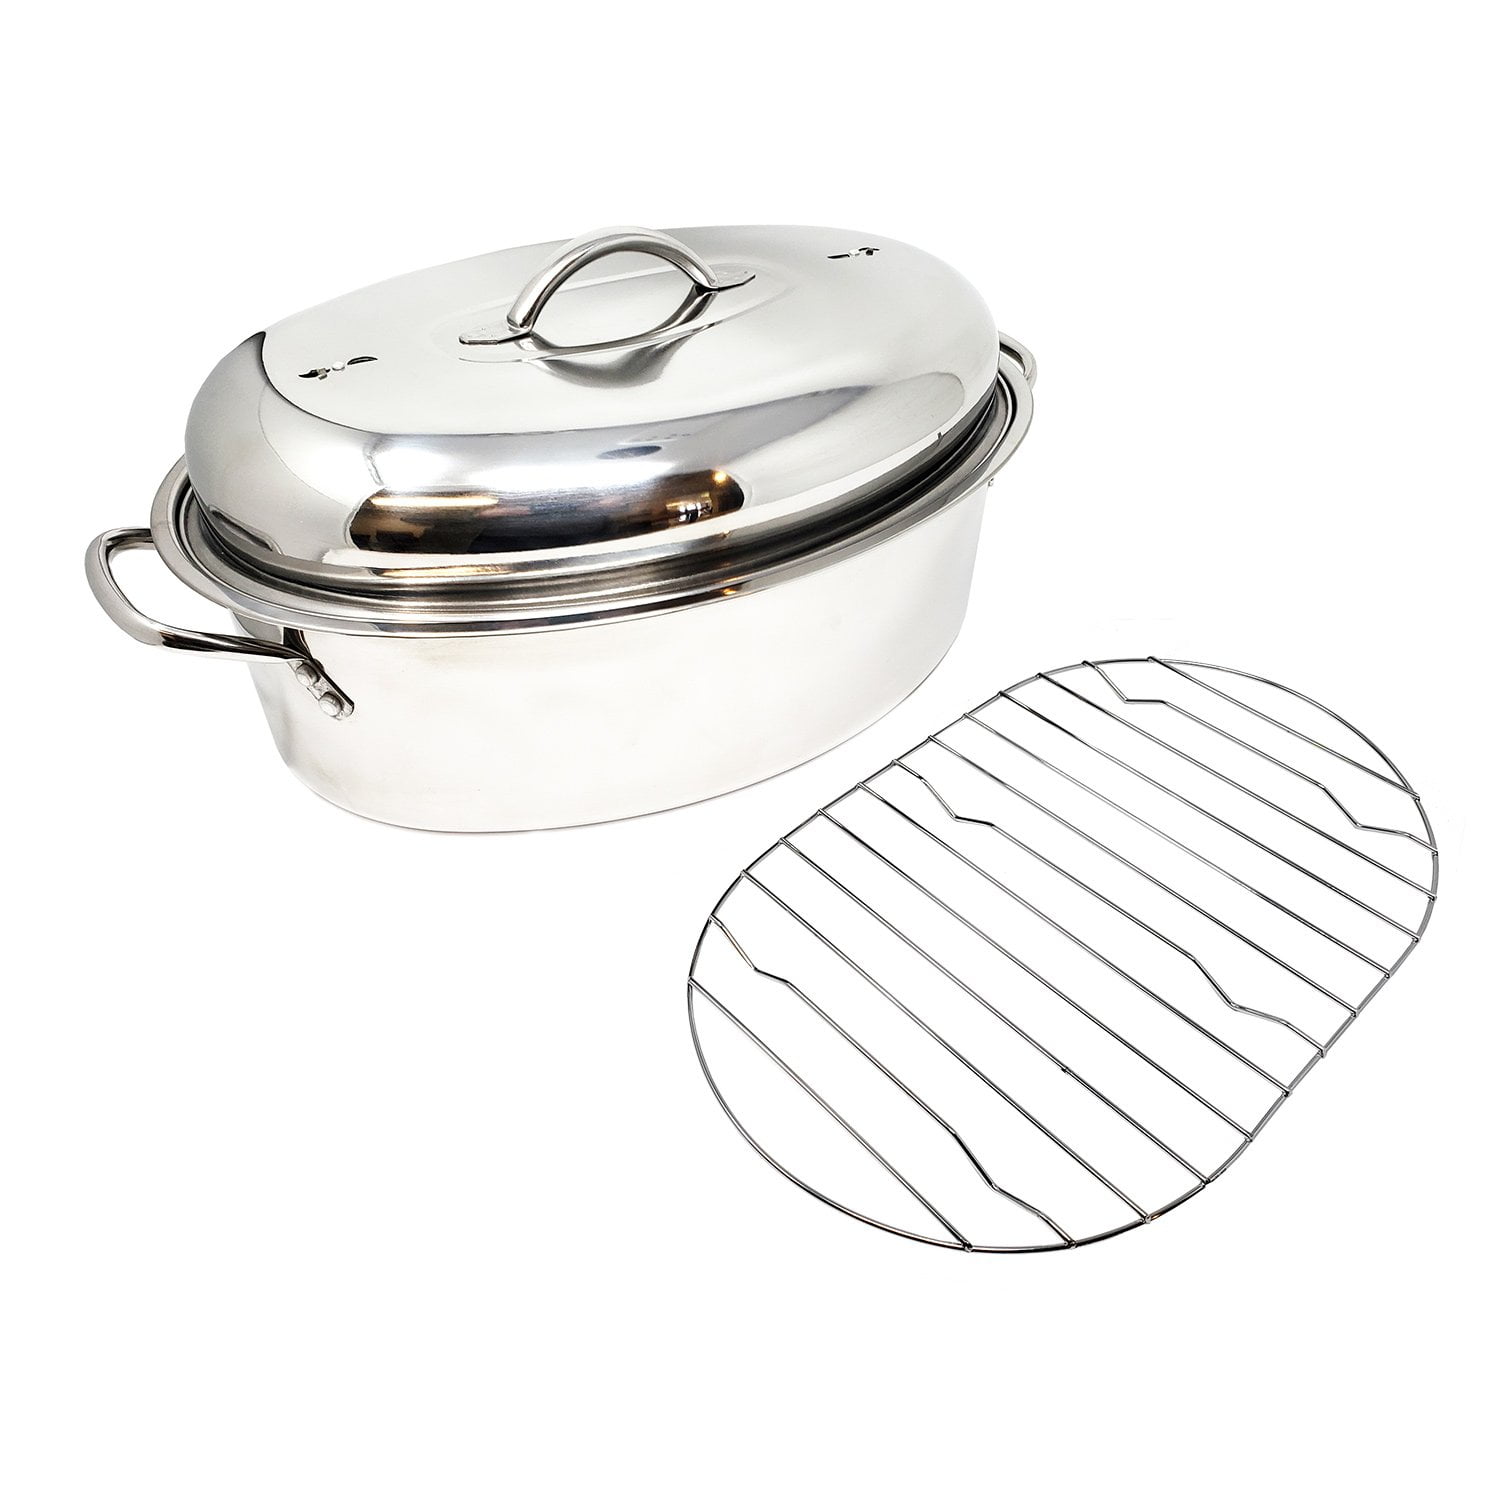 Durable and Dishwasher Safe CWR32161 Perfect for Oven Cooking During Party and Gathering Silver OVENTE Oval Roasting Pan 16 Inch Stainless Steel Non Stick Coated Tray with Lid and Rack